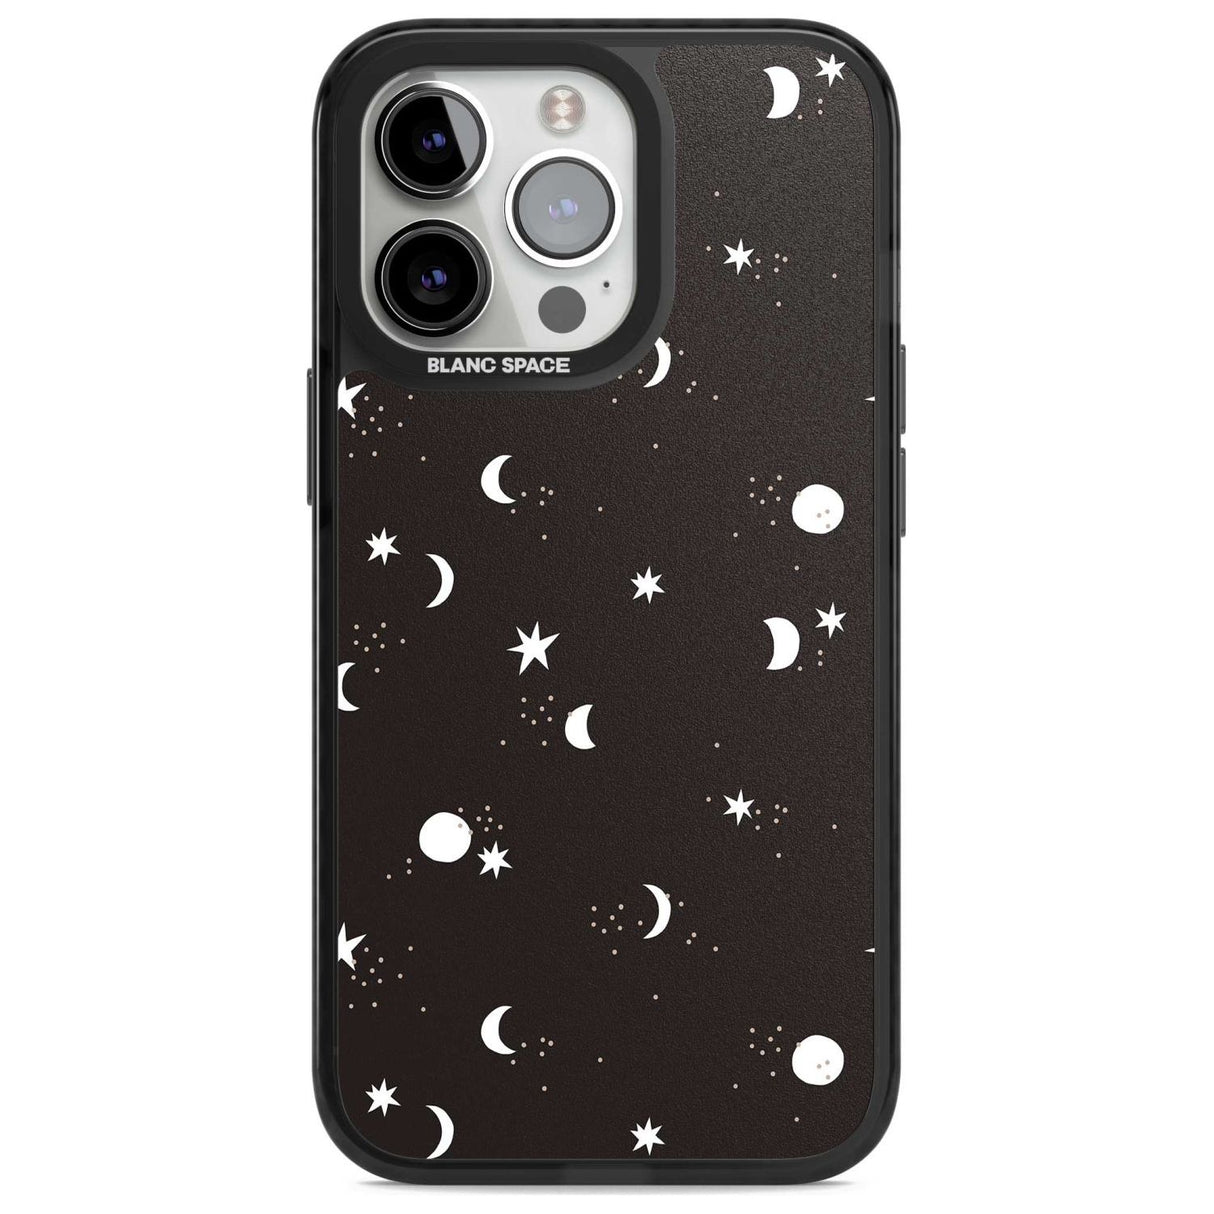 Funky Moons & Stars Phone Case iPhone 15 Pro / Magsafe Black Impact Case,iPhone 15 Pro Max / Magsafe Black Impact Case,iPhone 14 Pro Max / Magsafe Black Impact Case,iPhone 13 Pro / Magsafe Black Impact Case,iPhone 14 Pro / Magsafe Black Impact Case Blanc Space